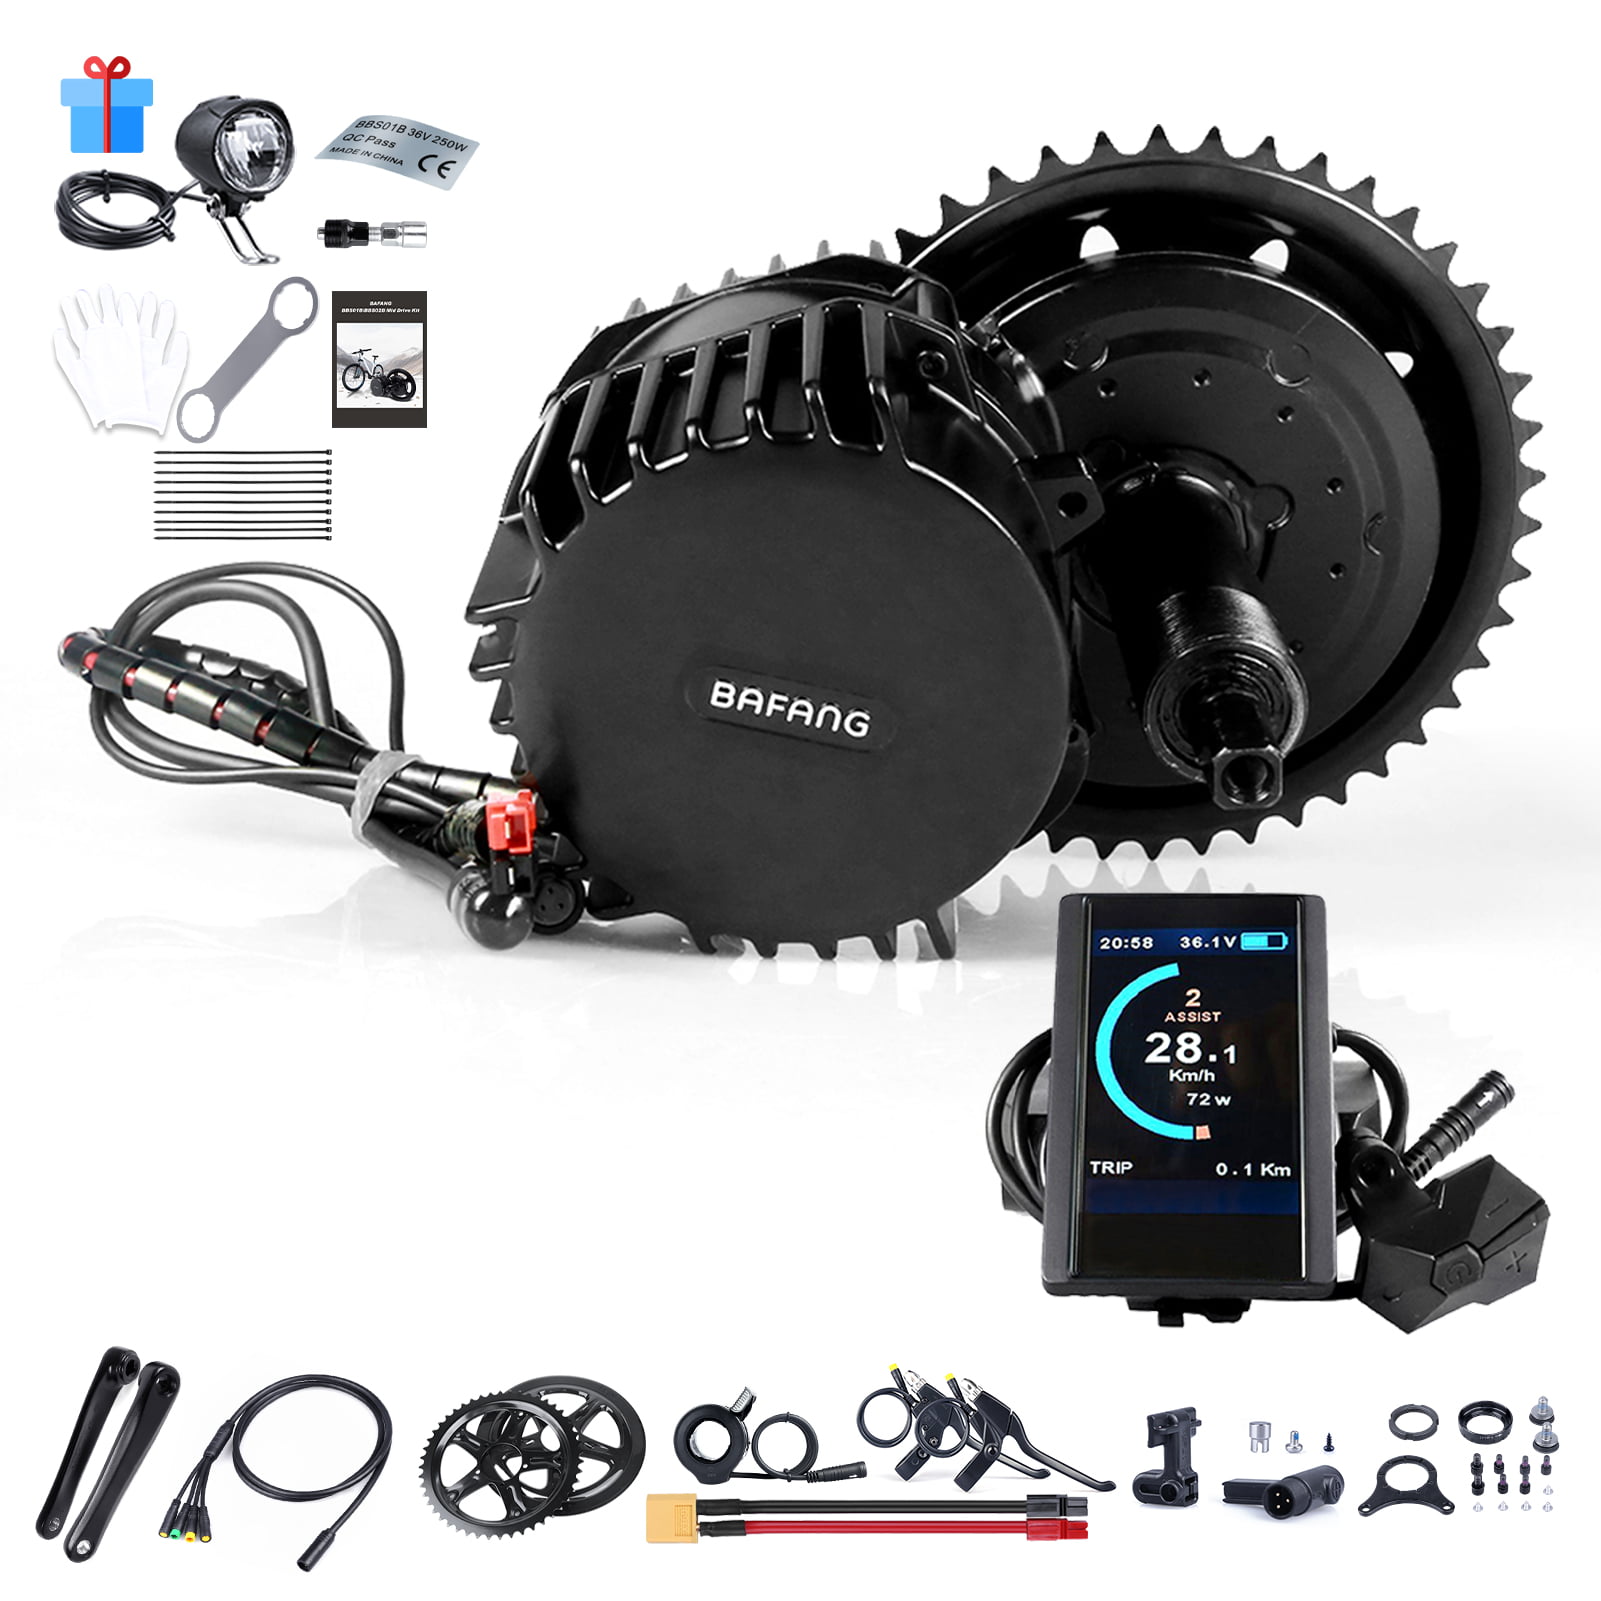 BAFANG 36V/48V 250-1000W 8fun BBS Controller BBSHD BBS BBS03B Controller Electric Bike Controller Accessories for Mid Drive Crank Engine Kits New Version 